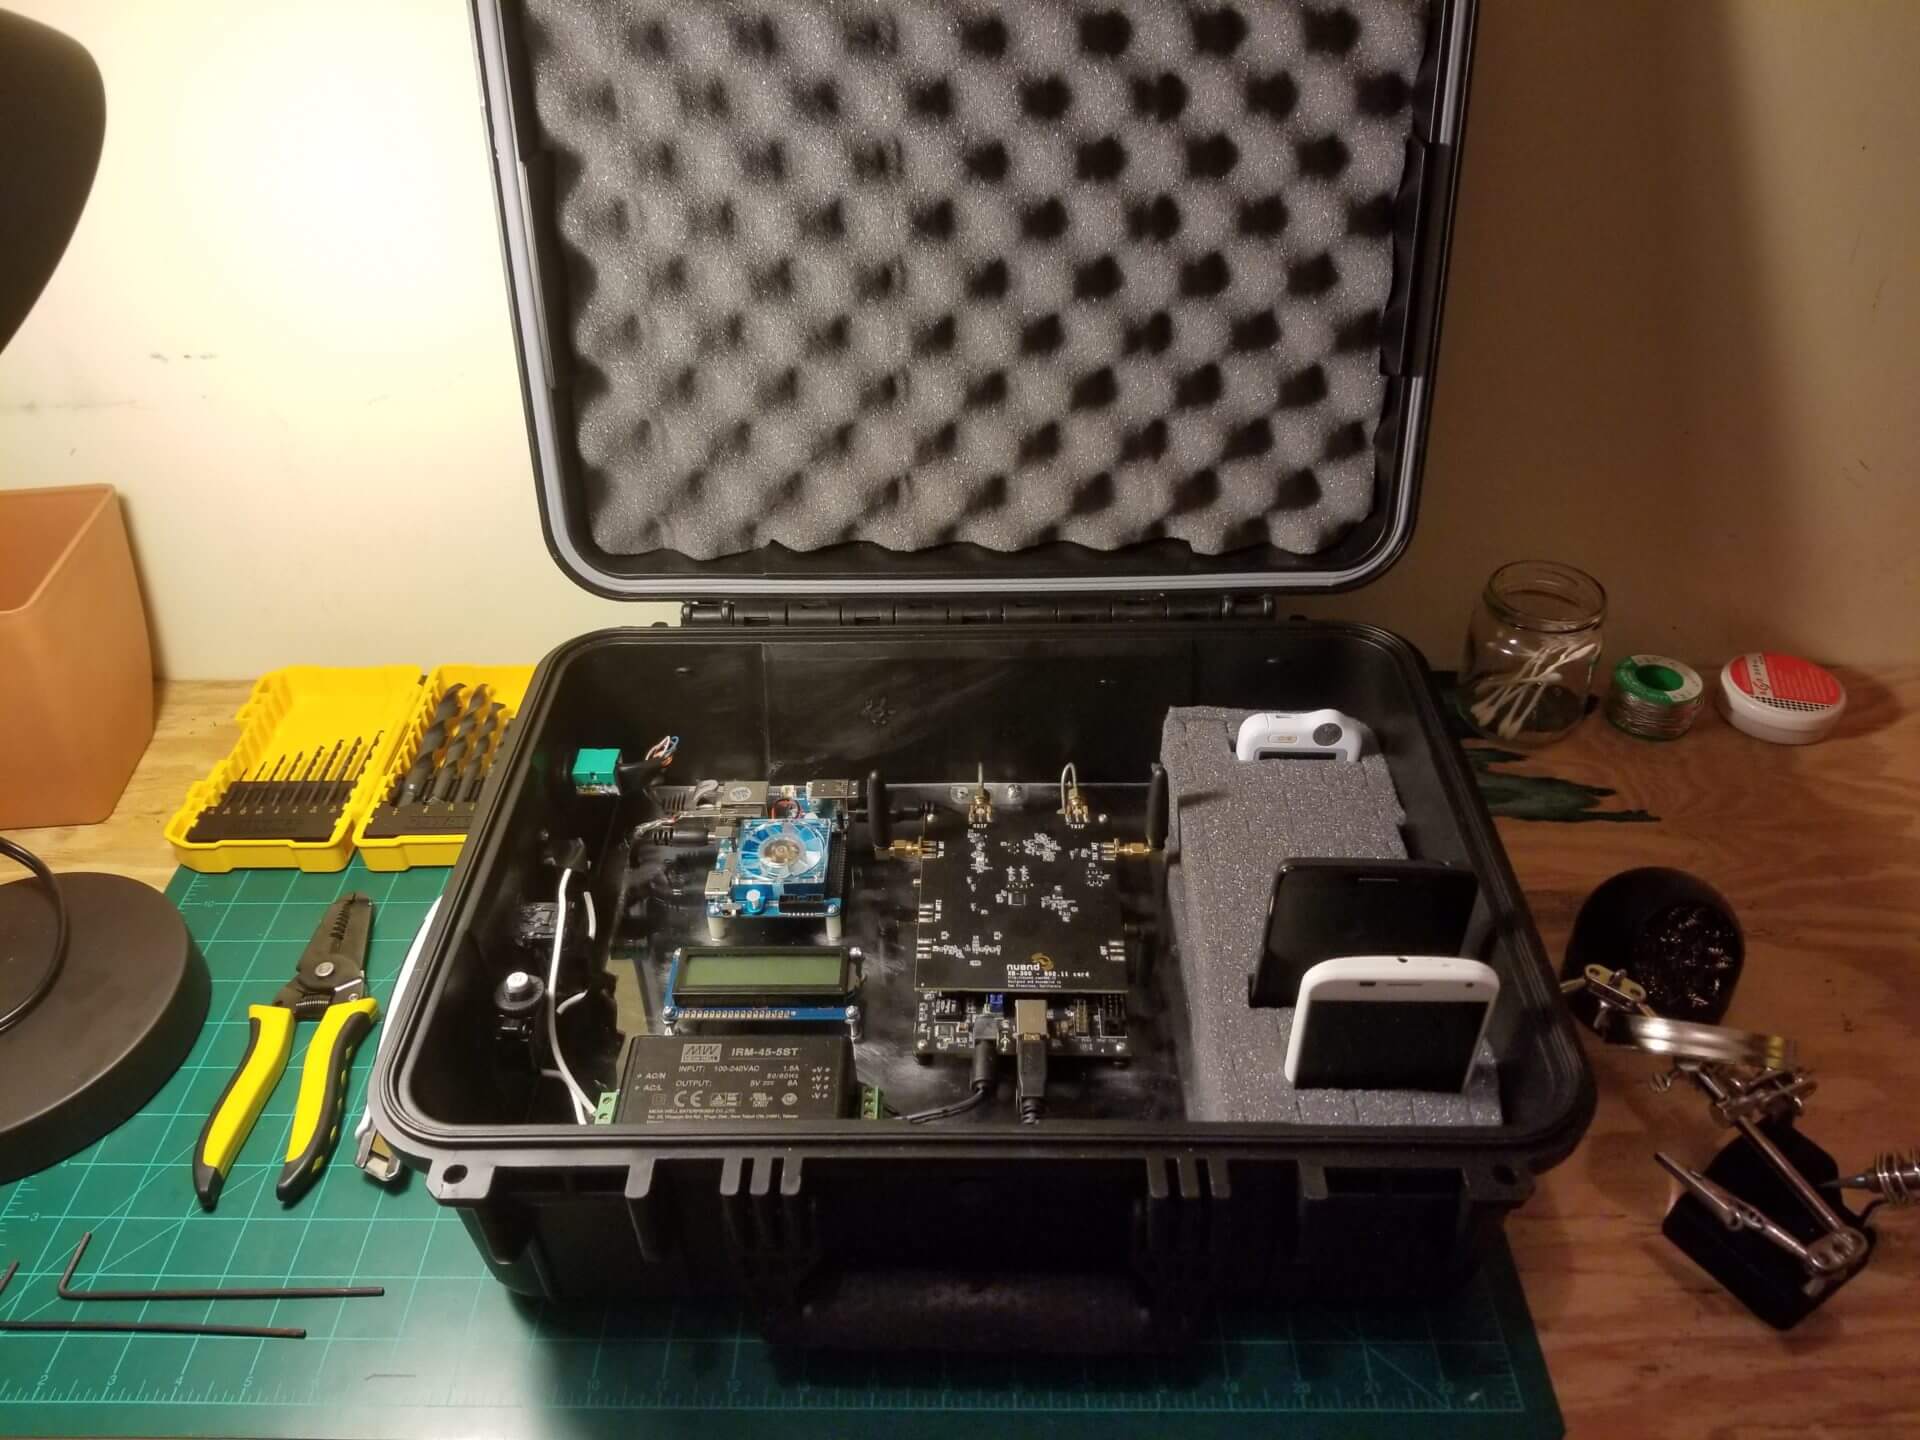 Inside of the Beamlilnk case, which includes which includes a cellular base station and test mobile phones and a portable EKG device. PHOTO/ARPAD KOVESDY.